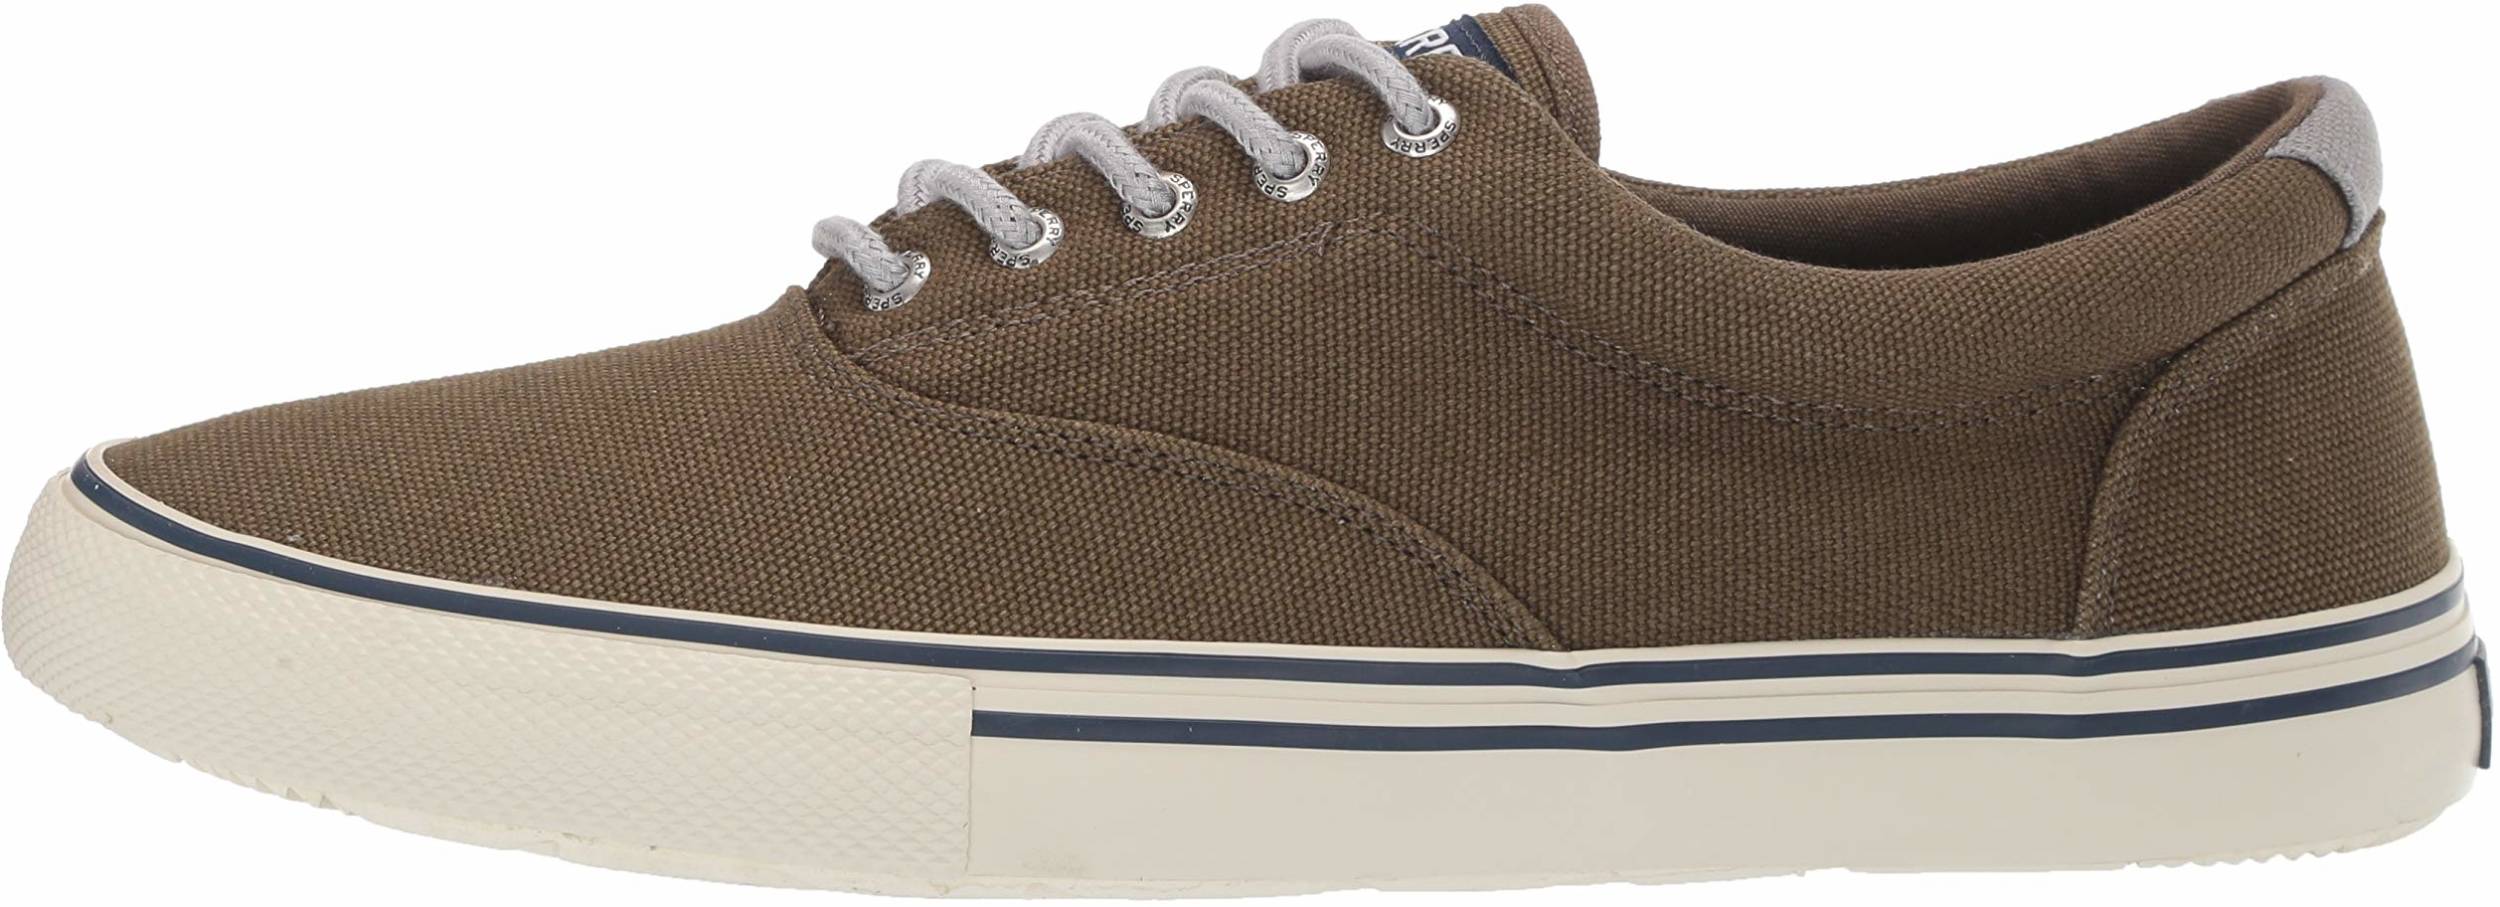 sperry canvas shoes